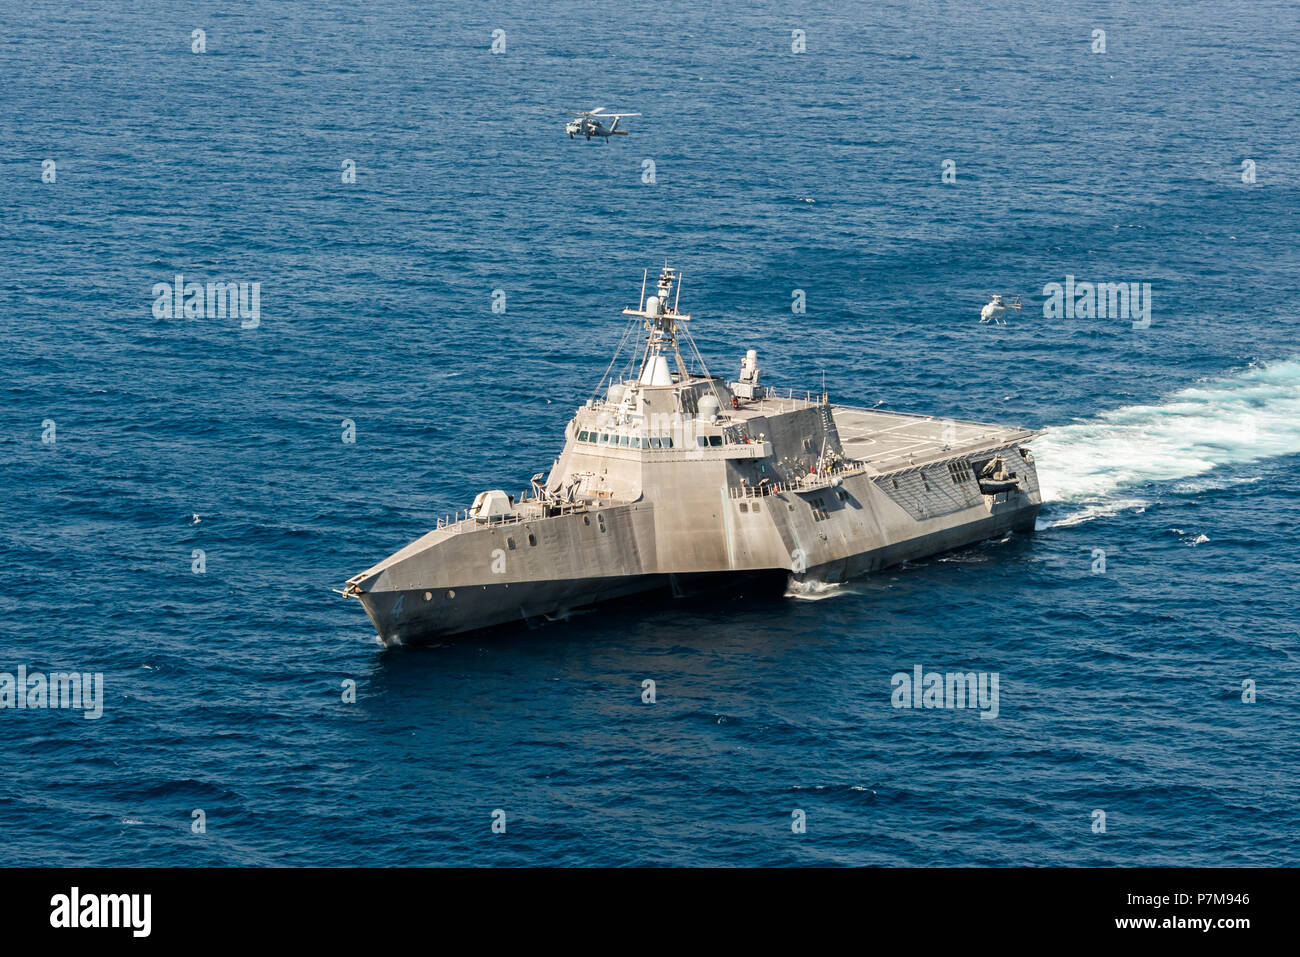 180628-N-BT947-1547 PACIFIC OCEAN (June 28, 2018) - An MQ-8C Fire Scout unmanned helicopter conducts underway operations with an MH-60S Seahawk helicopter and the Independence-variant littoral combat ship USS Coronado (LCS 4). The new Fire Scout variant is expected to deploy with the LCS class to provide reconnaissance, situational awareness, and precision targeting support. Coronado is working with Air Test and Evaluation Squadron 1 (VX-1) to test the newest Fire Scout unmanned helicopter. Coronado is one of four designated test ships in the LCS class assigned to Littoral Combat Ship Squadron Stock Photo